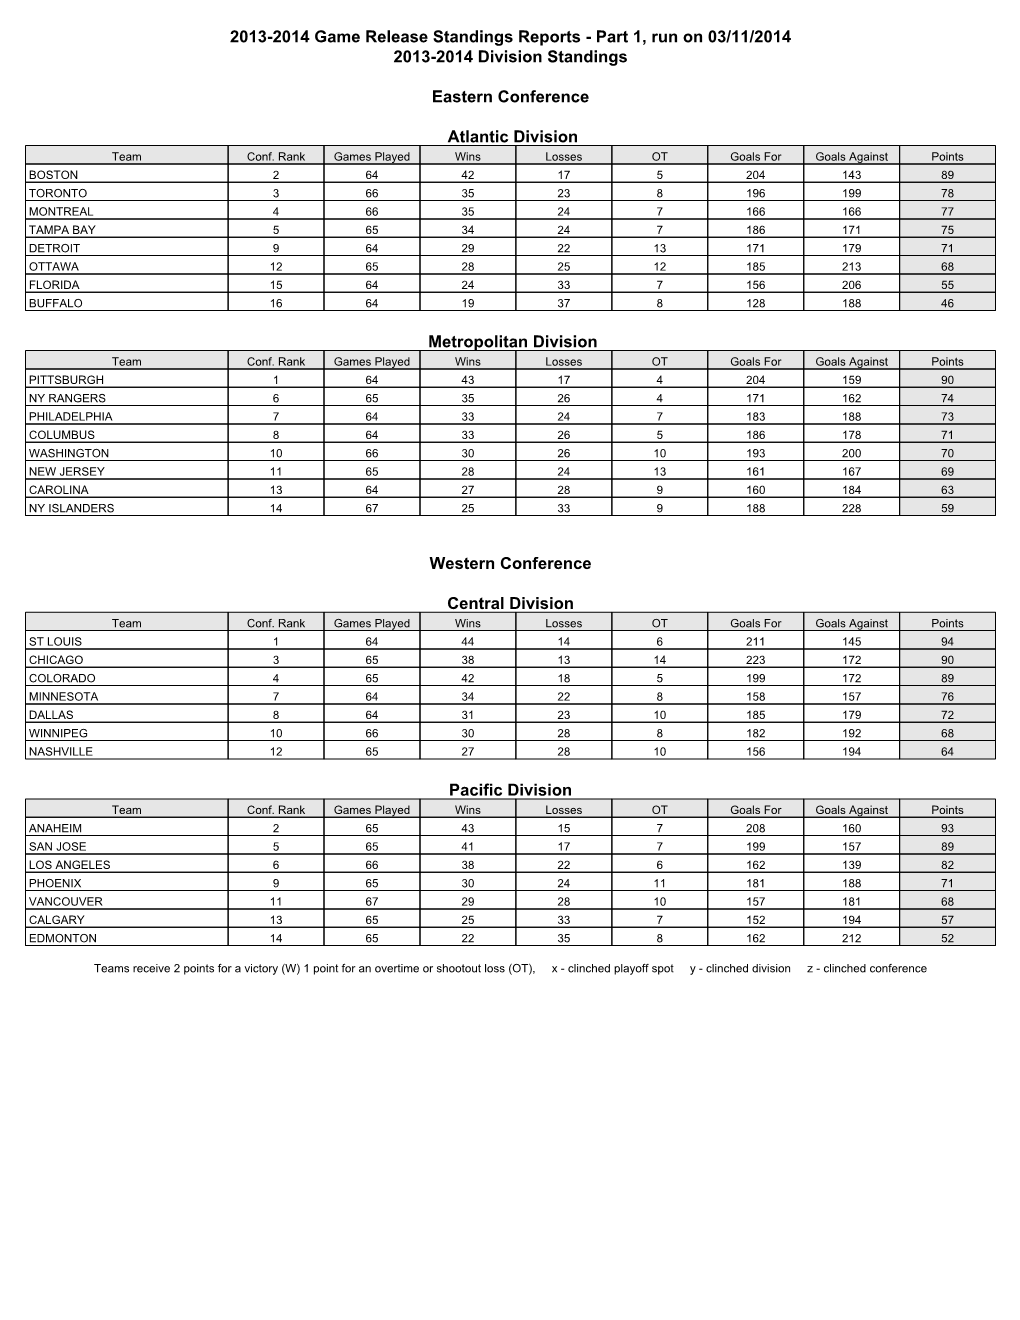 2013-2014 Game Release Standings Reports - Part 1, Run on 03/11/2014 2013-2014 Division Standings